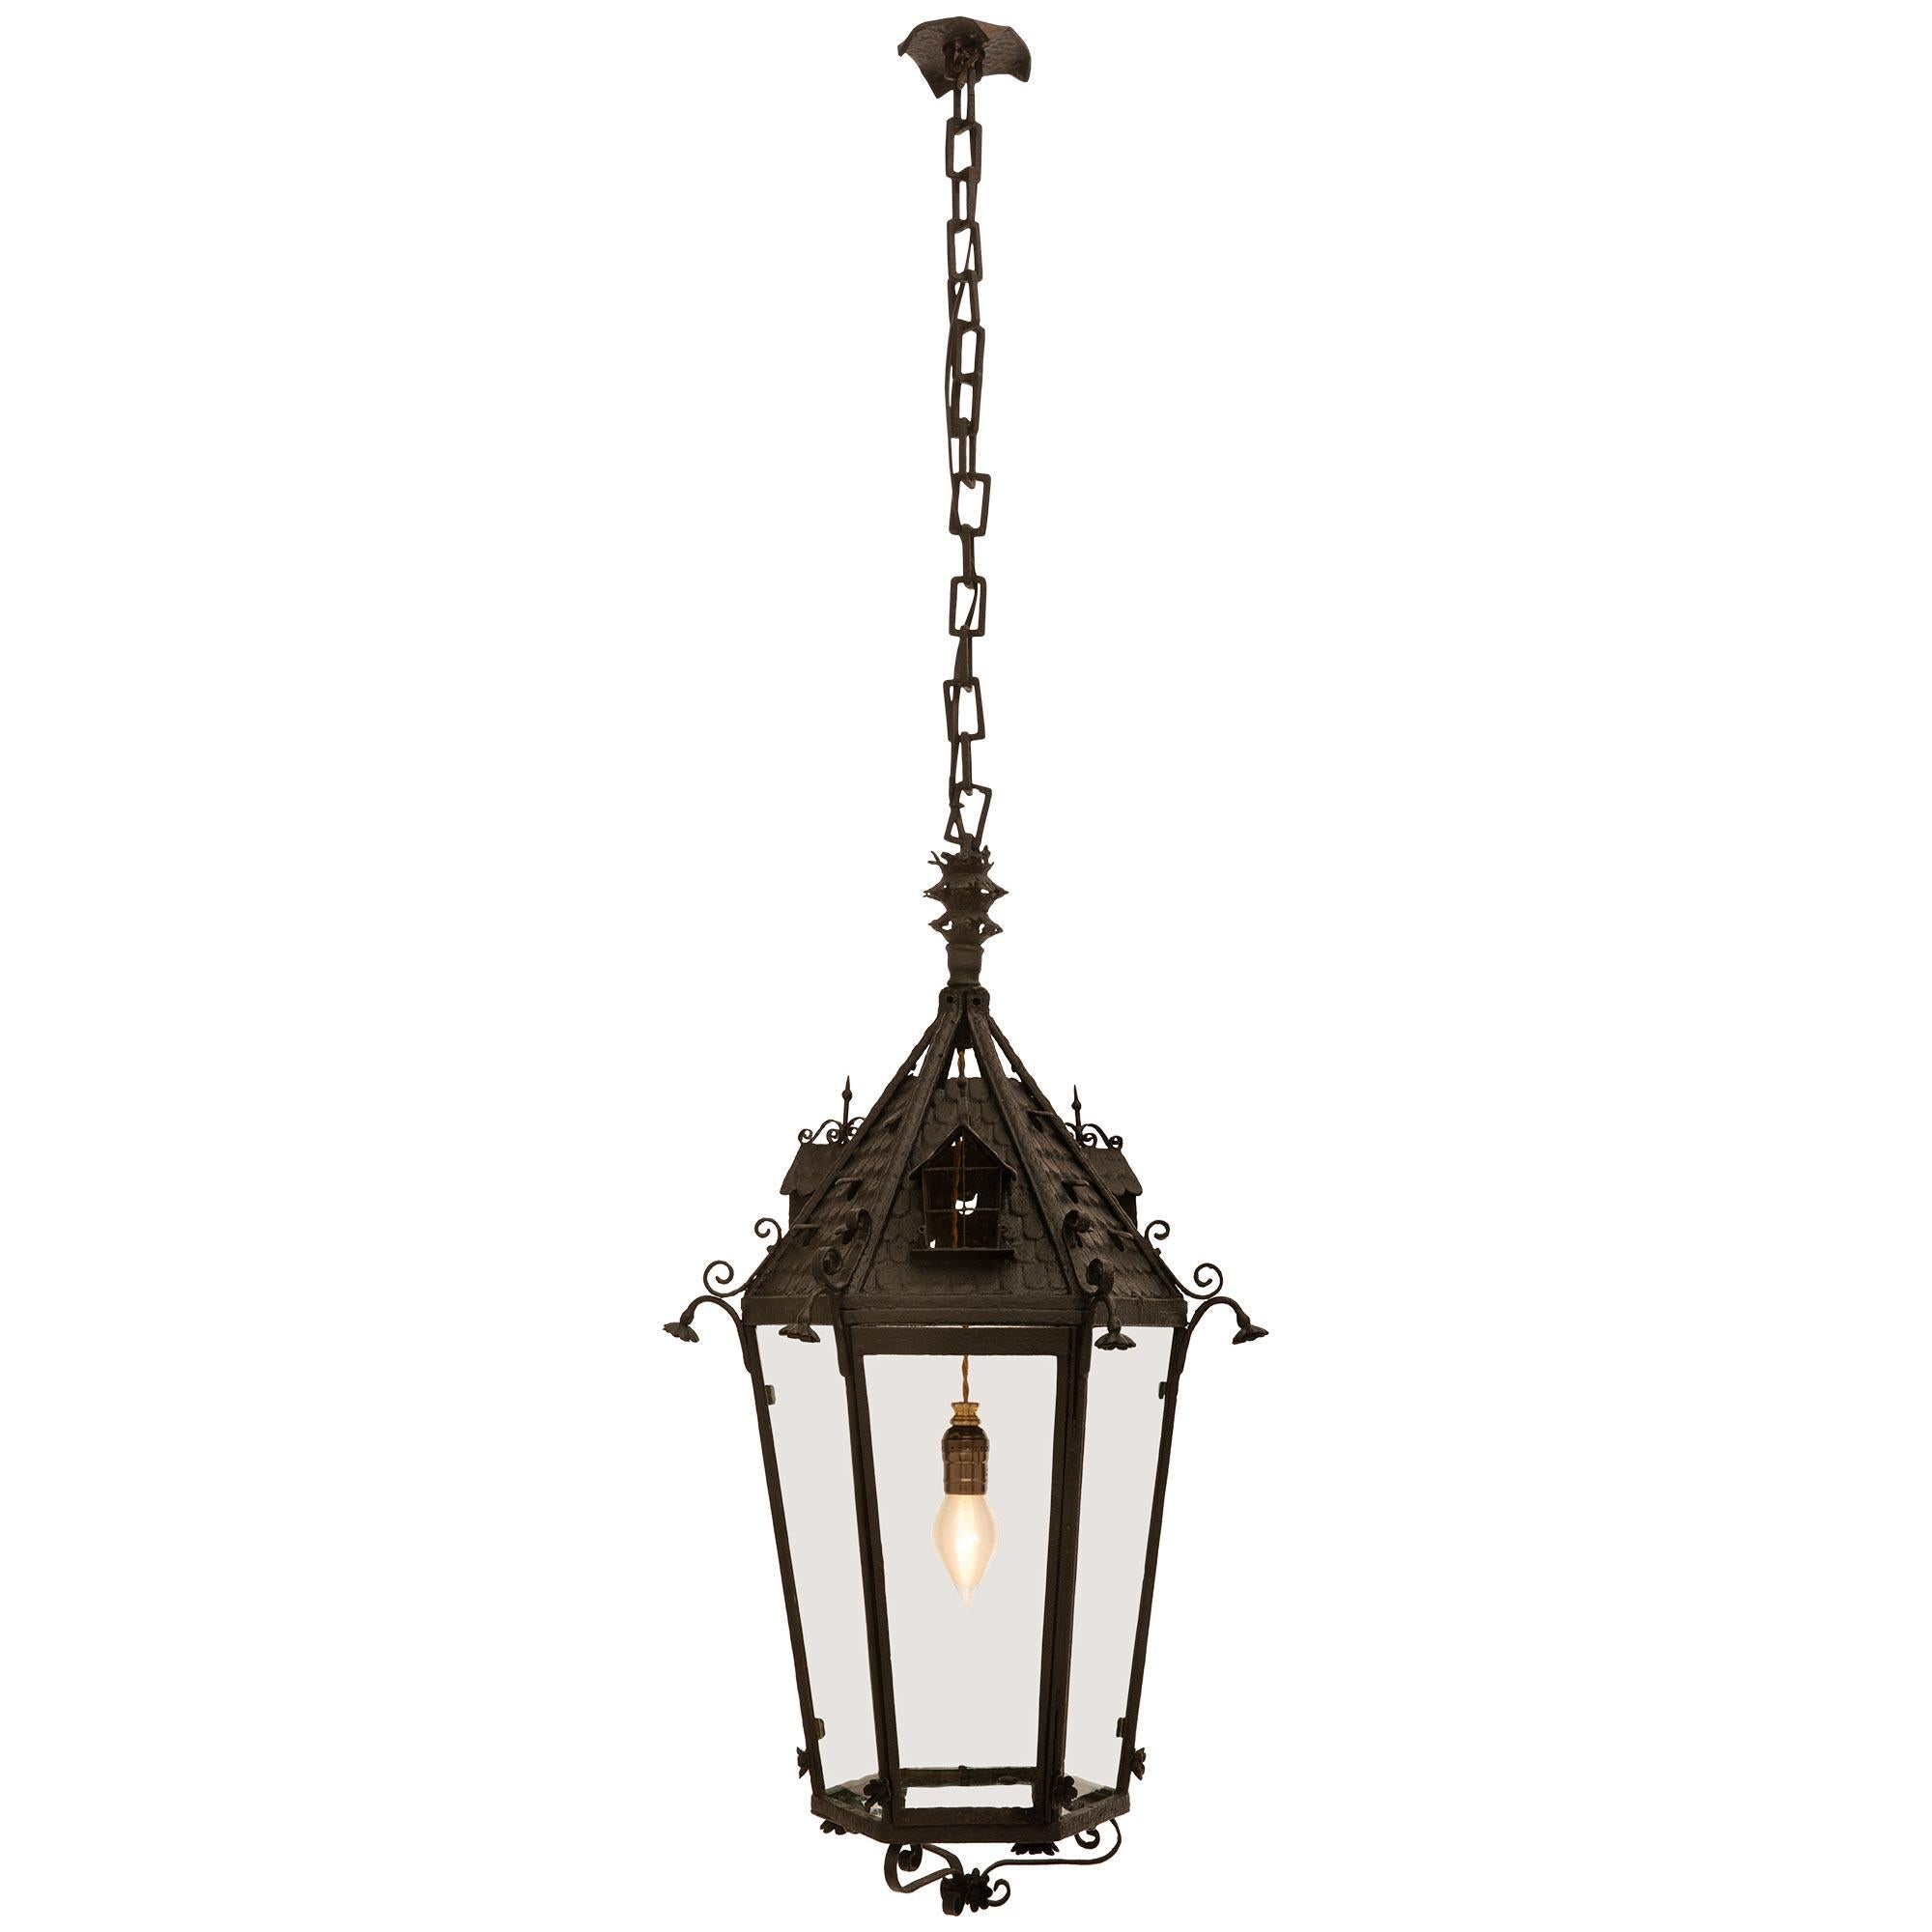 French 19th Century Wrought Iron Lantern For Sale